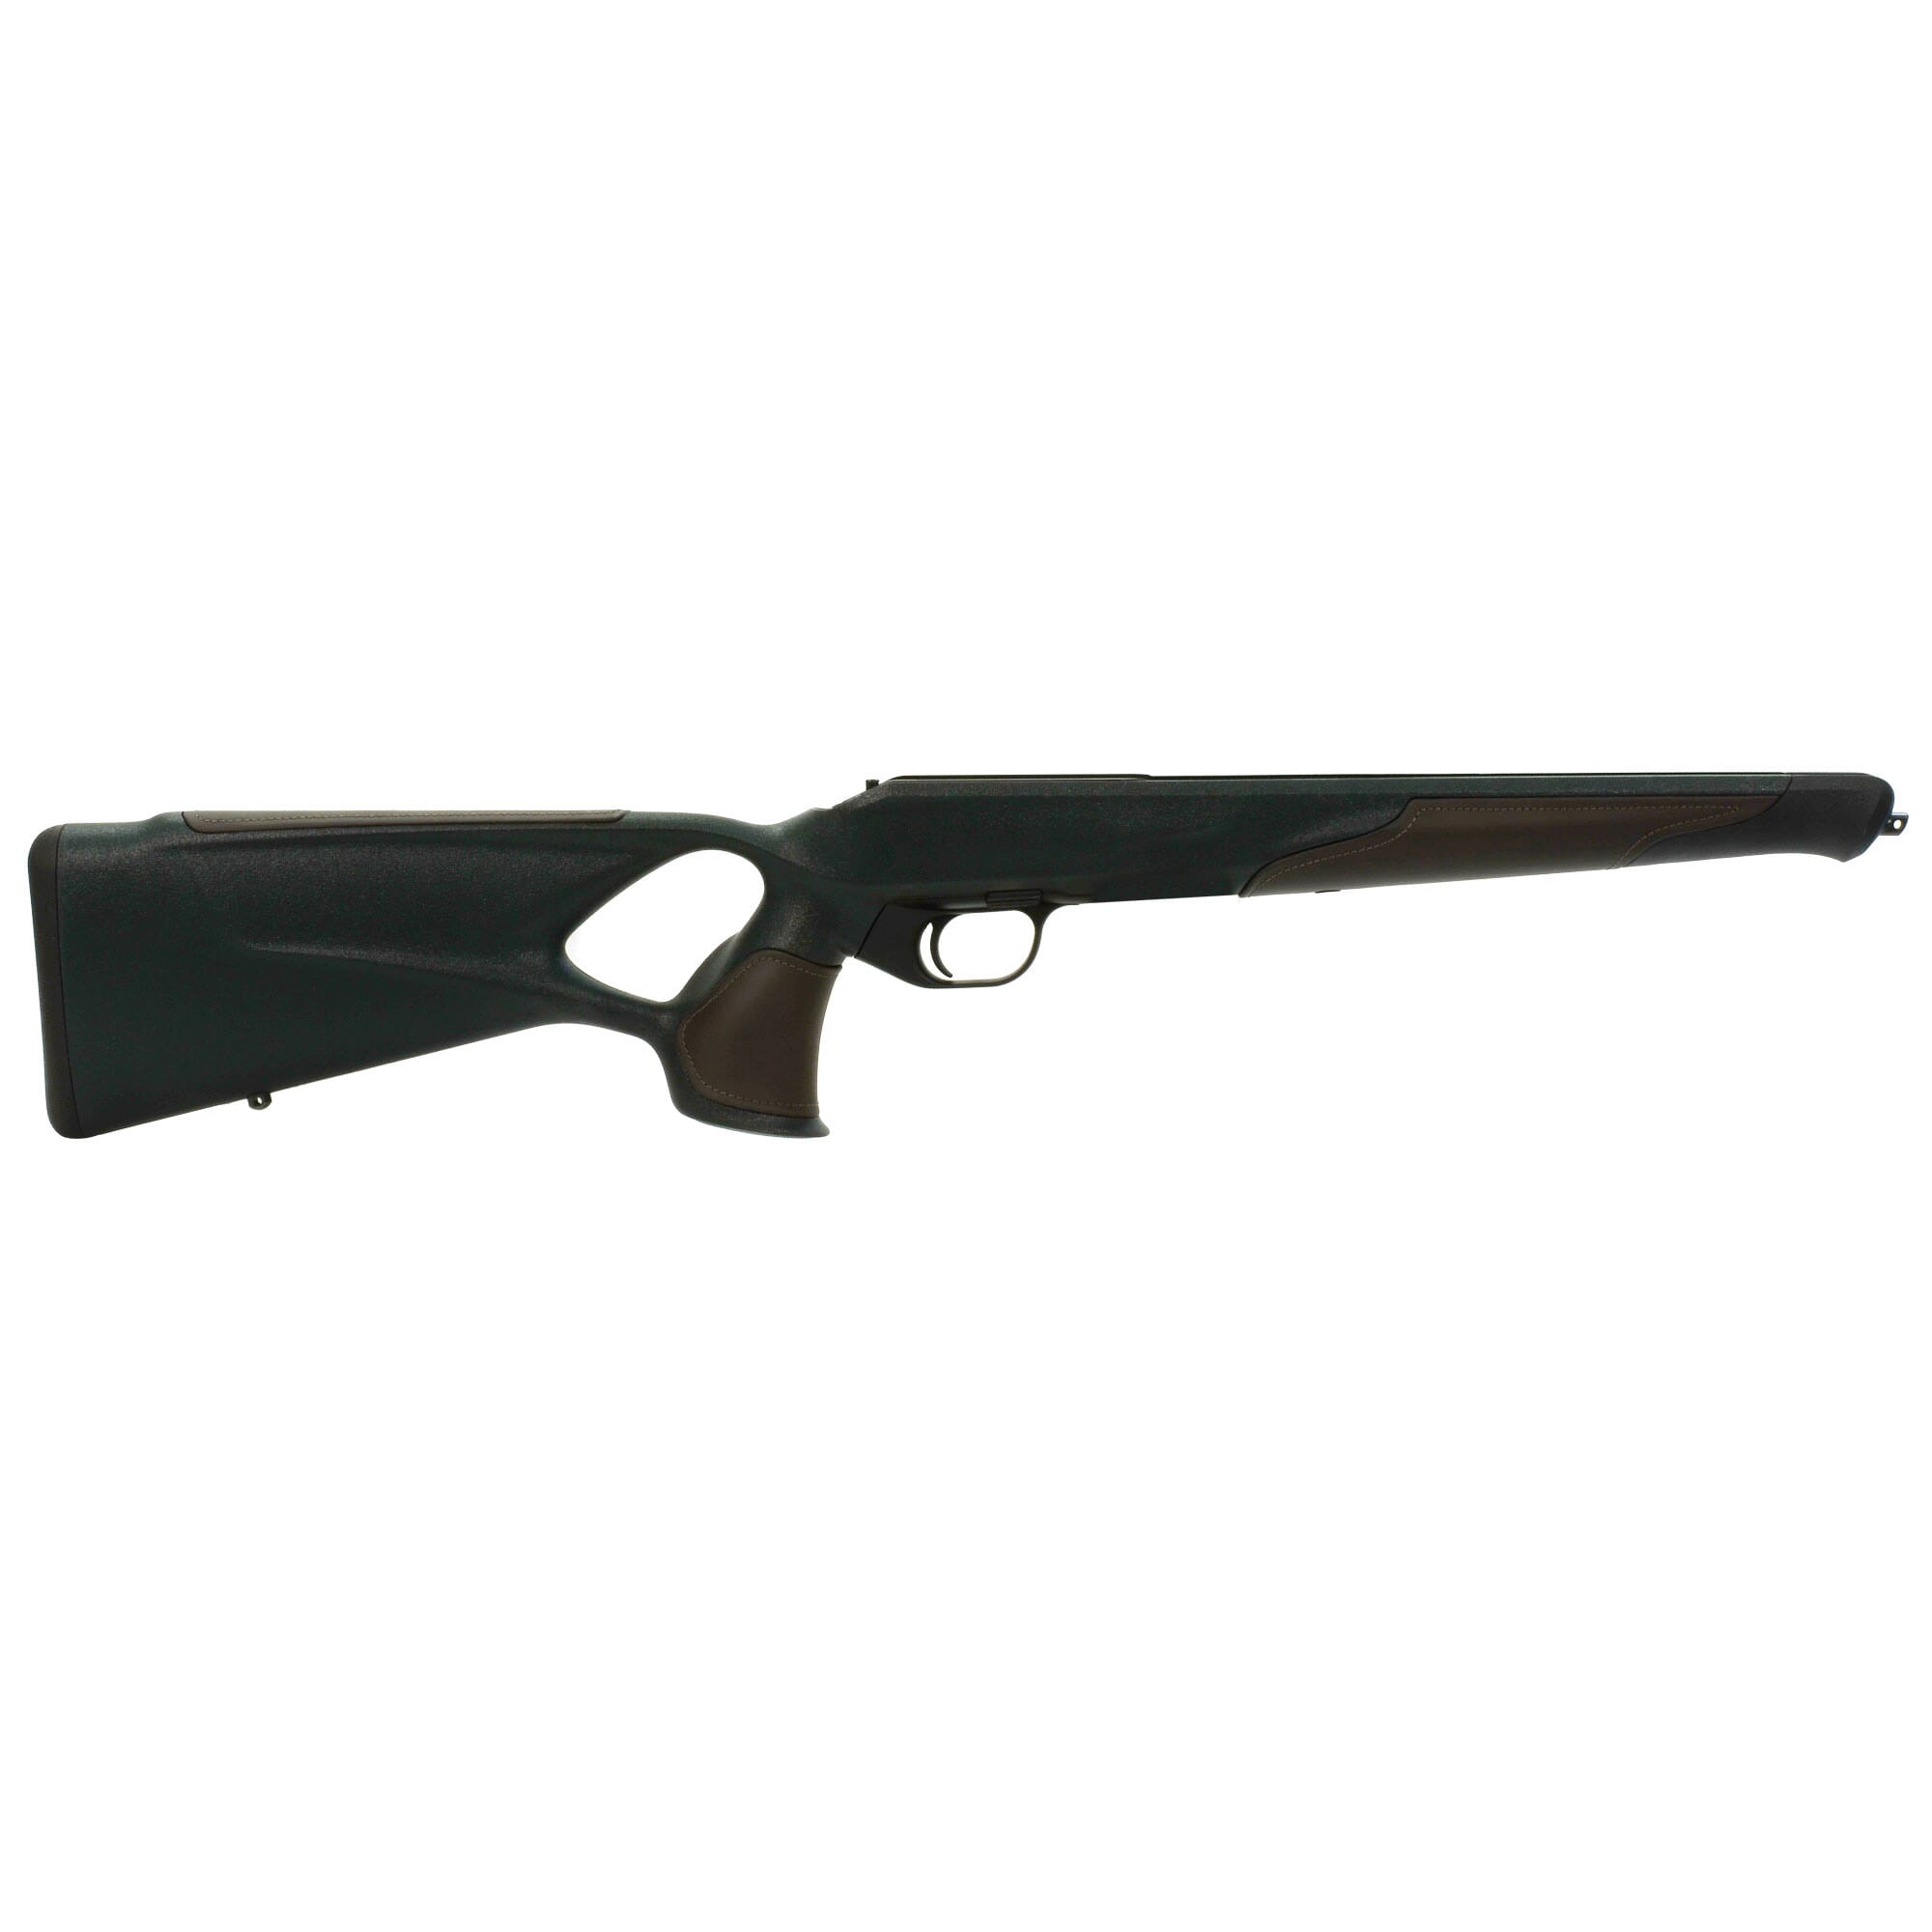 R8 Professional Success Green Thumbhole Stock Receiver With Leather